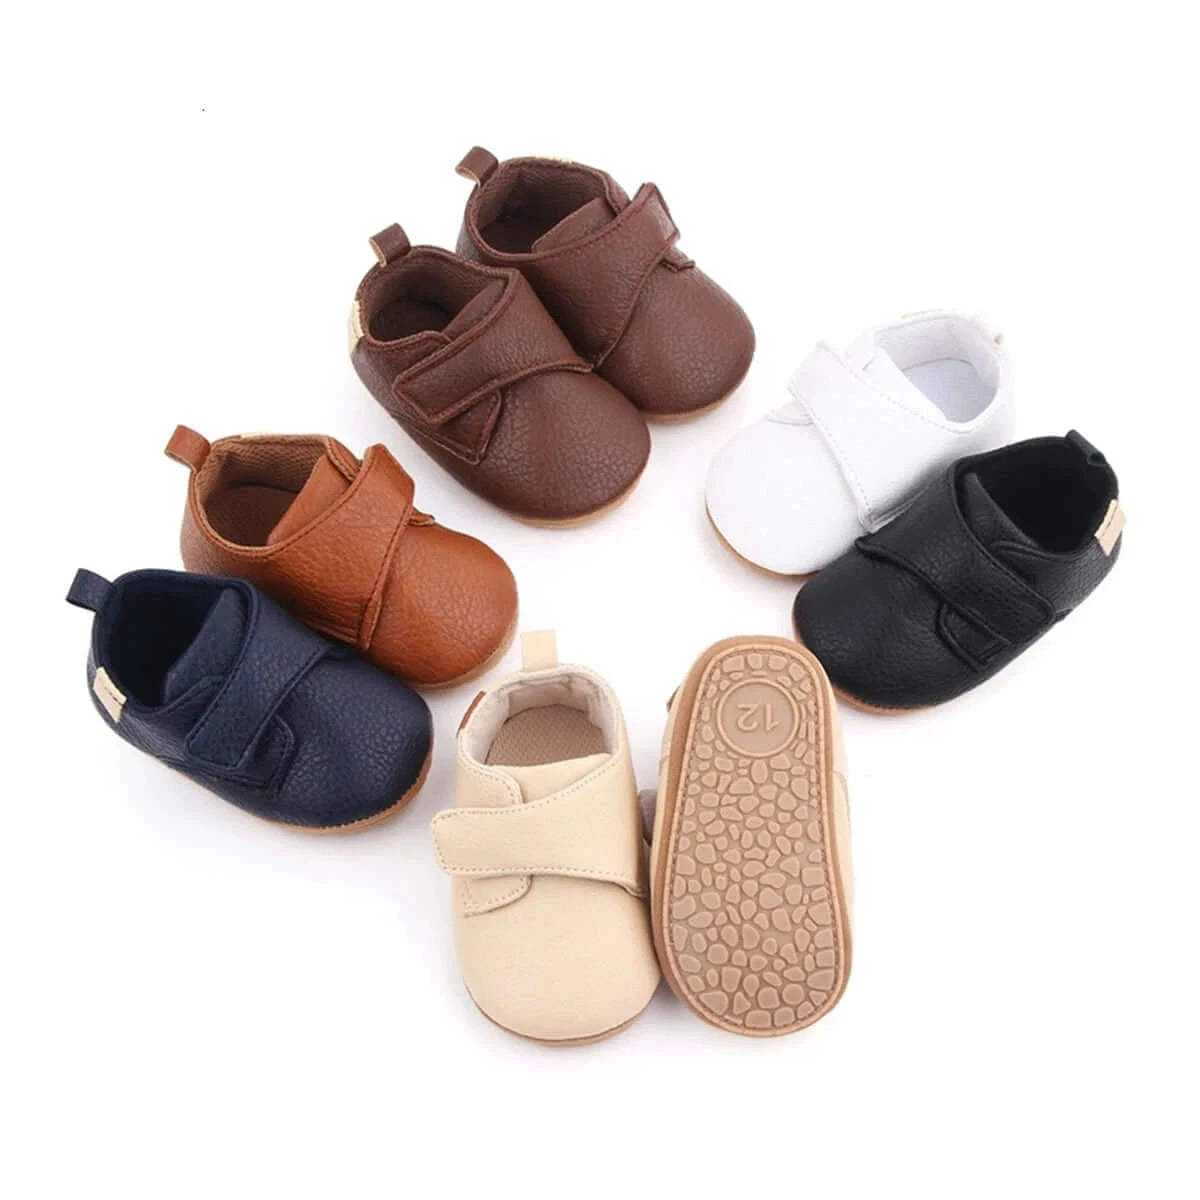 Image of Casual Baby Leather Shoes - Soft & Durable - Perfect for First Walkers. Shop now at OleOle.